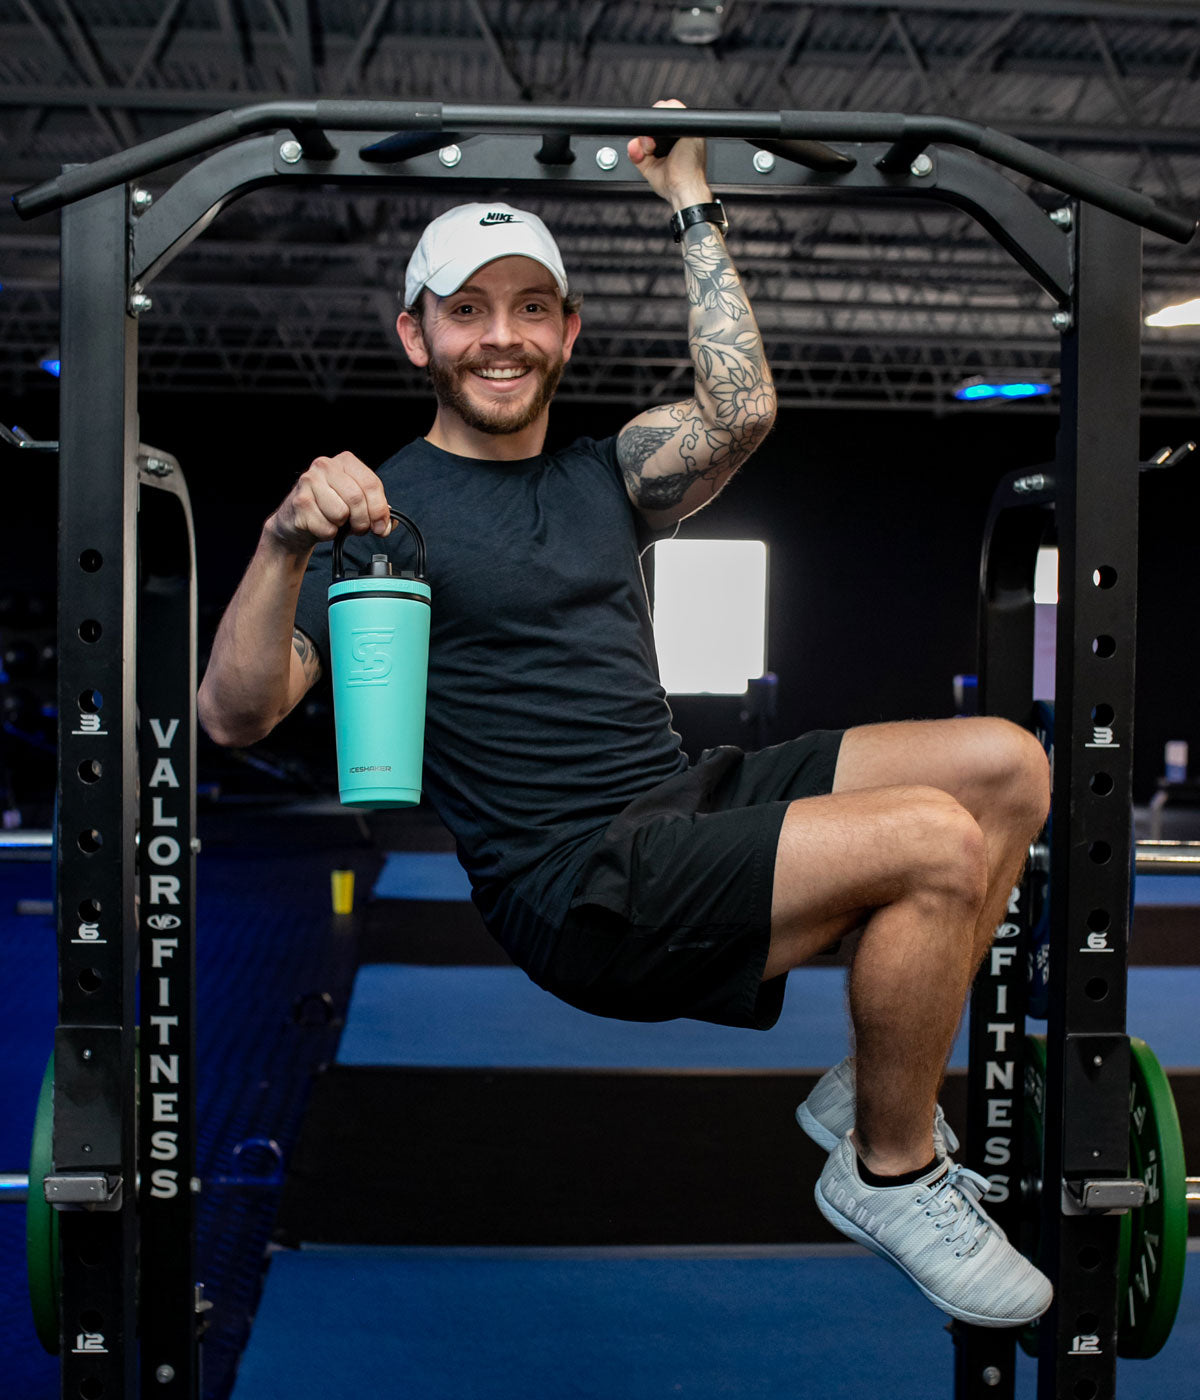 This image shows a young, happy man doing a one-armed pull up while he is holding the mint-colored 26oz Sport Bottle in his other hand.